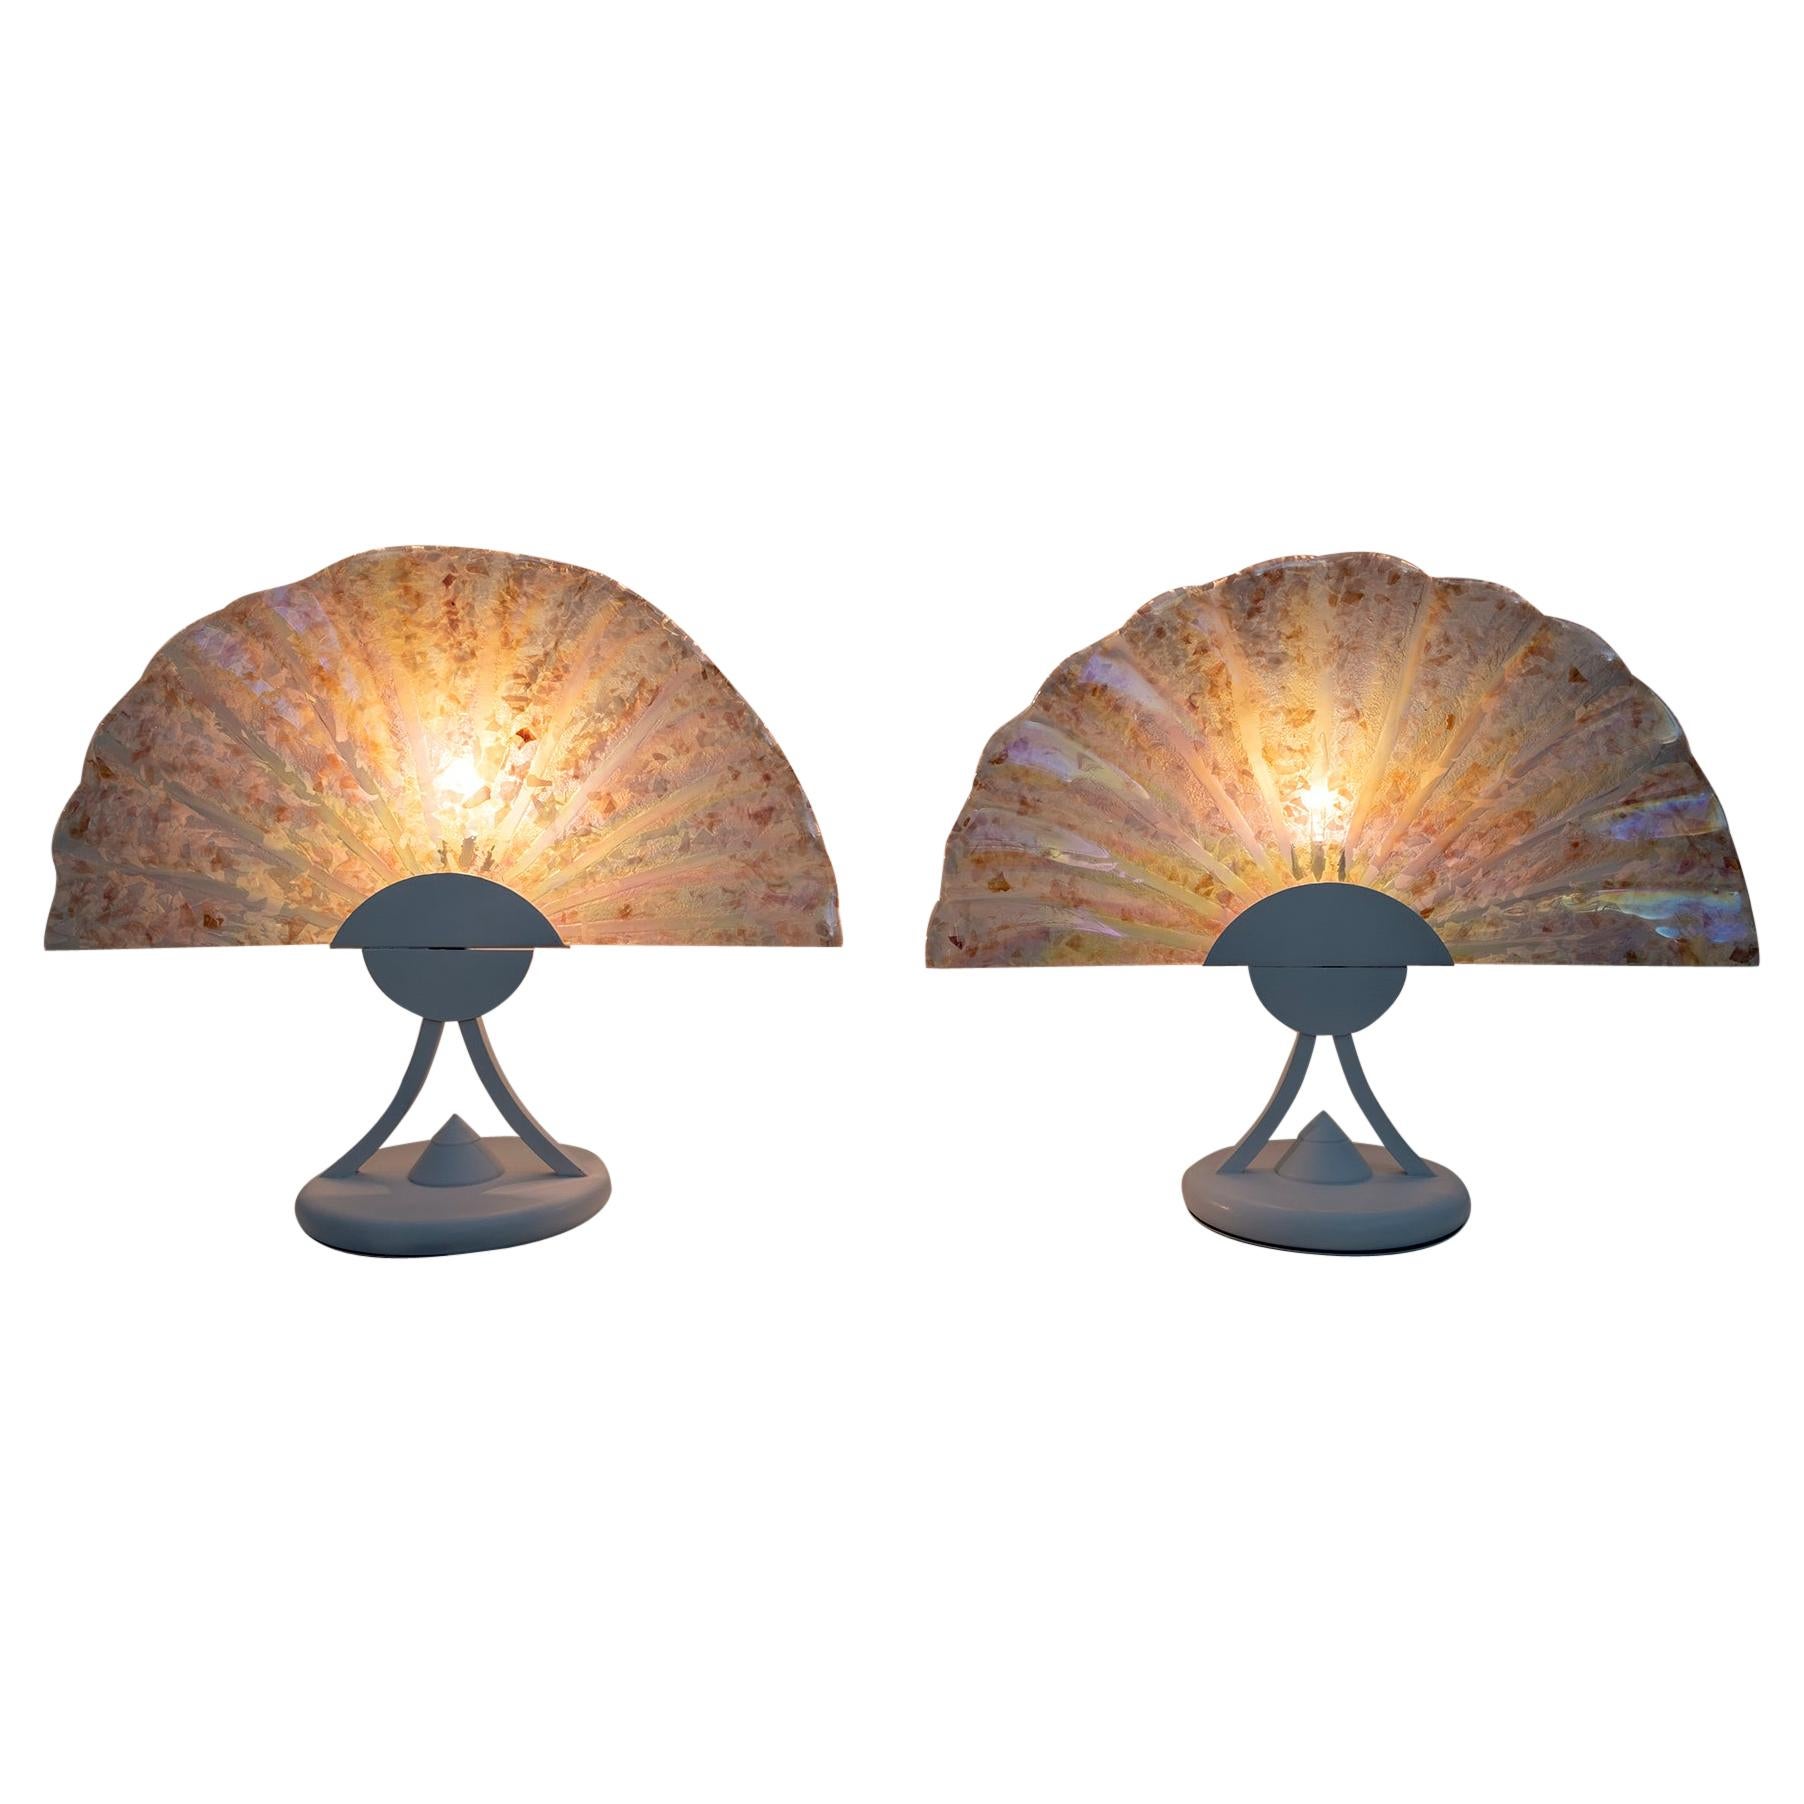 Pair of Postmodern Italian Iridescent Murano Glass Fan Table Lamps, 1980s For Sale